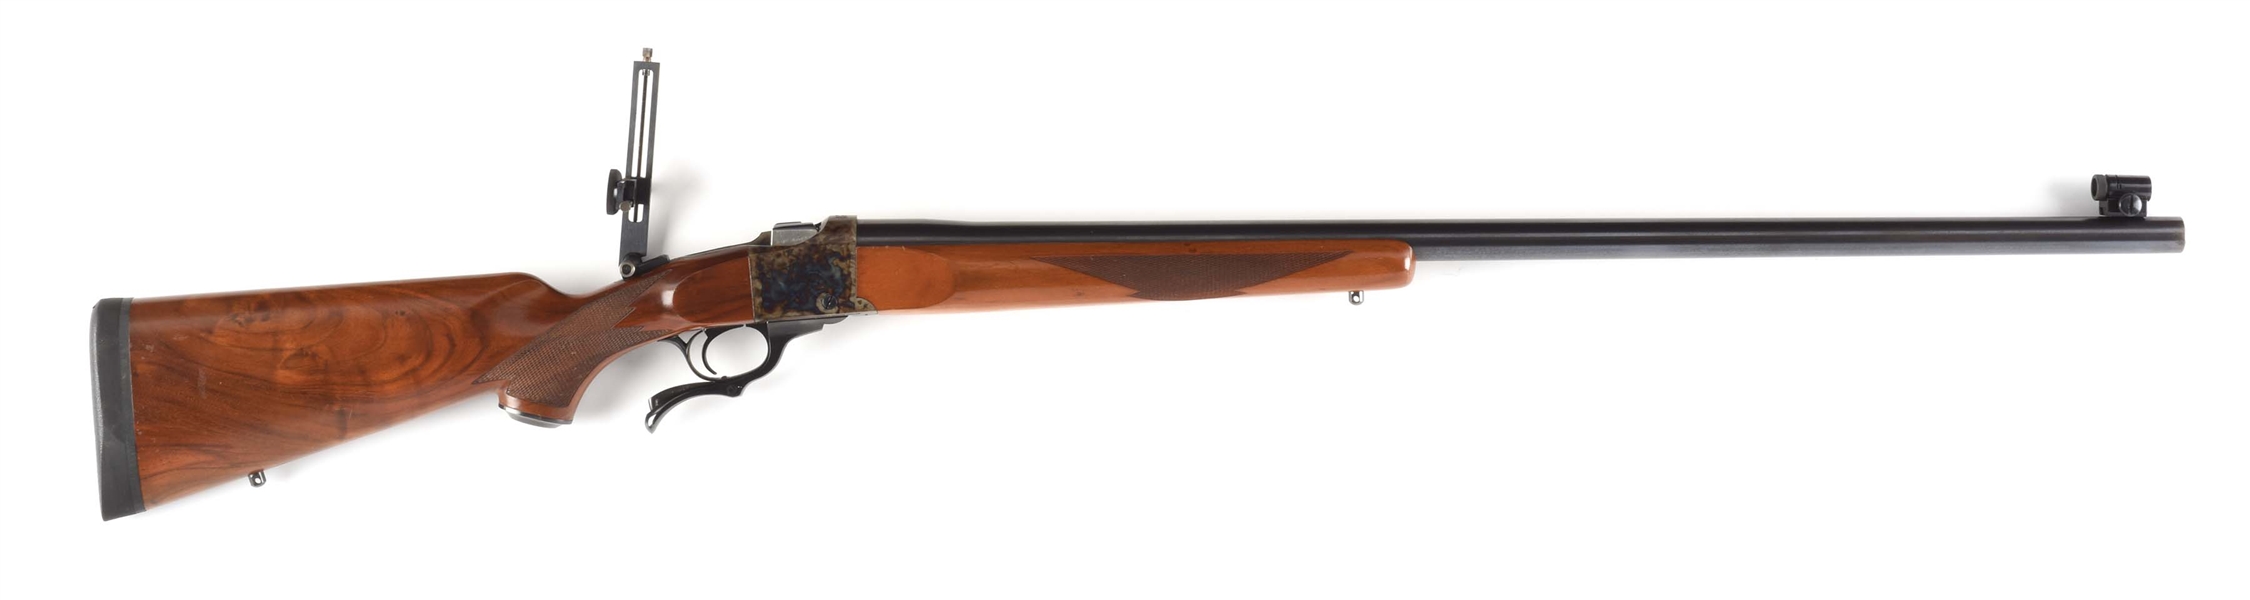 (M) RUGER NO. 1 ONE OF ONE HUNDRED SINGLE SHOT RIFLE.